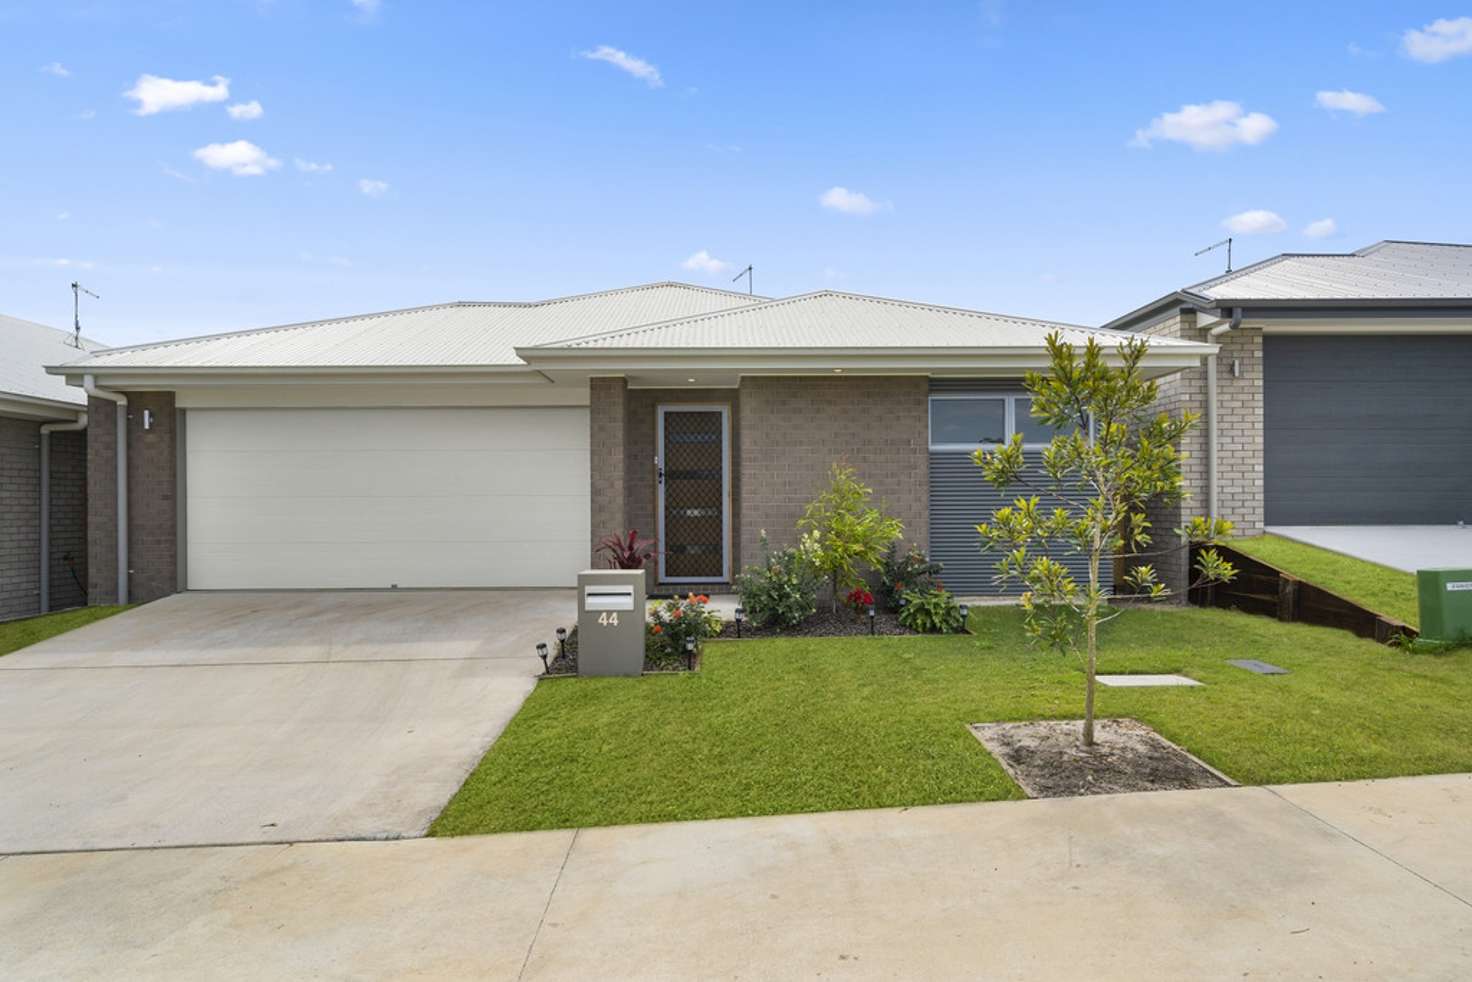 Main view of Homely house listing, 44/20 Crumpton Place, Beerwah QLD 4519